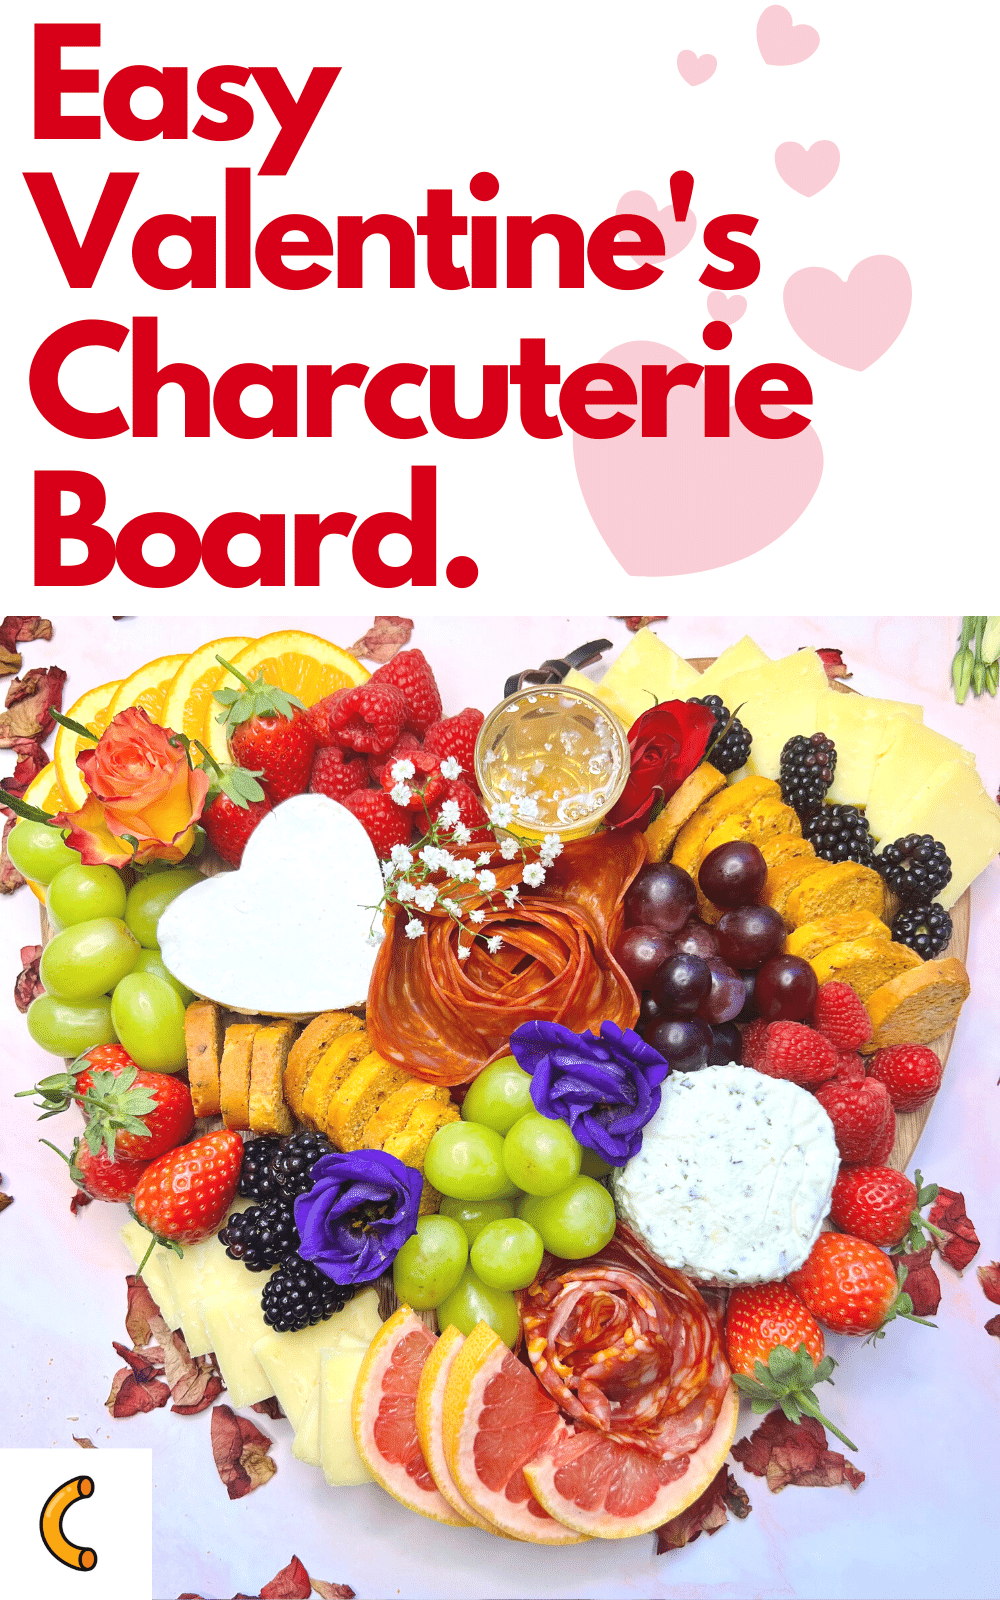 Easy Valentine's Charcuterie Board! The perfect way to enjoy cheese on Valentine's day!